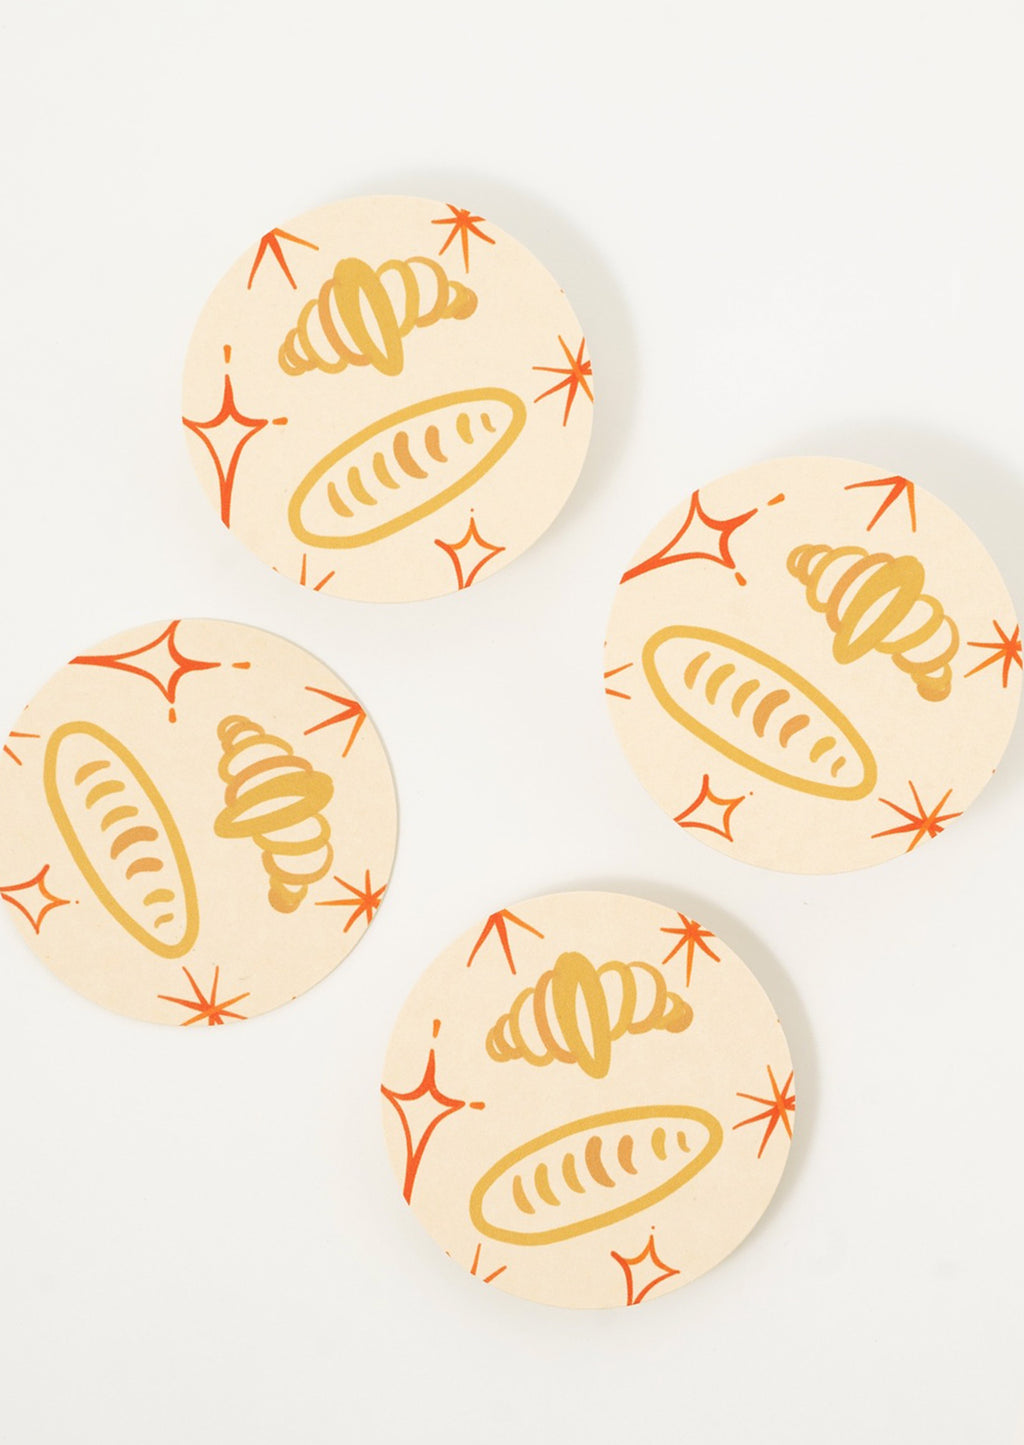 Croissants: Paper coasters with bread and croissant print.